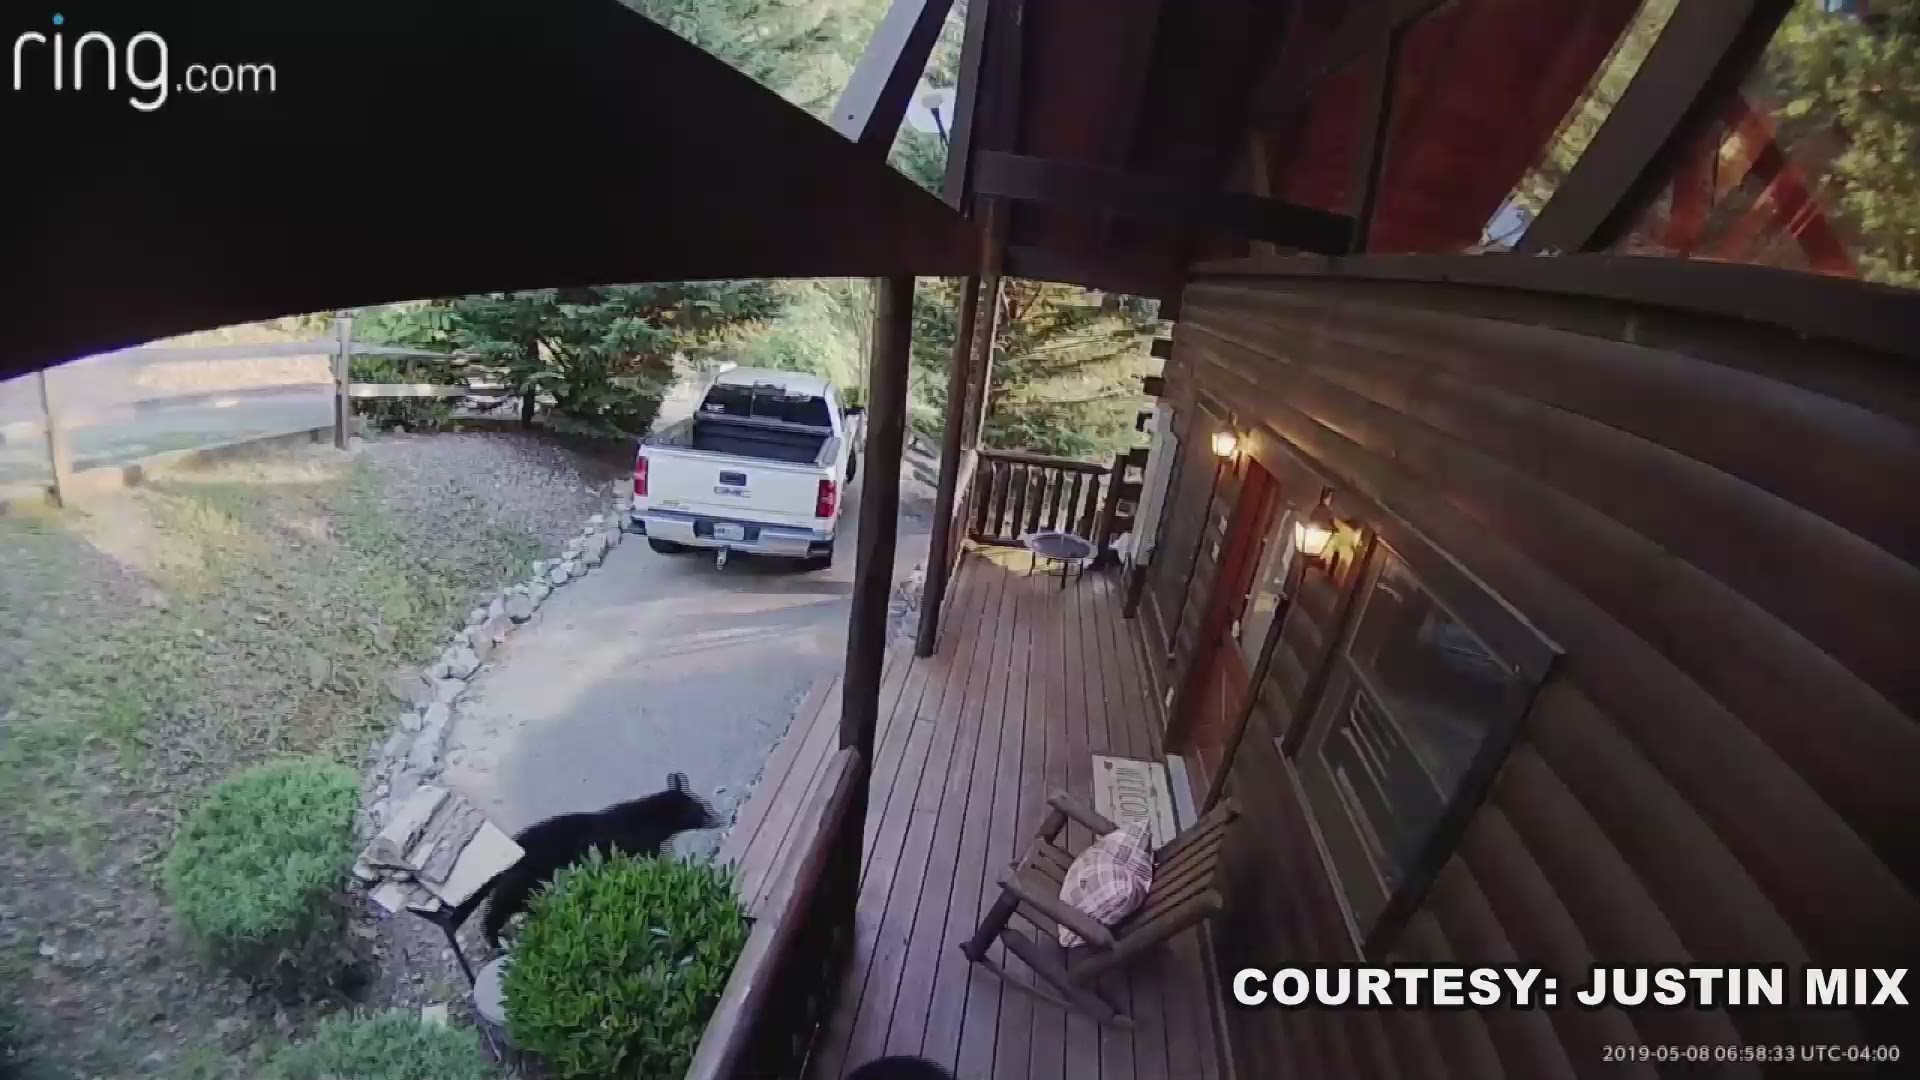 The bears are seen wandering around and one even went up to the front door to try to get into the cabin. The whole encounter was captured on a RING surveillance camera.